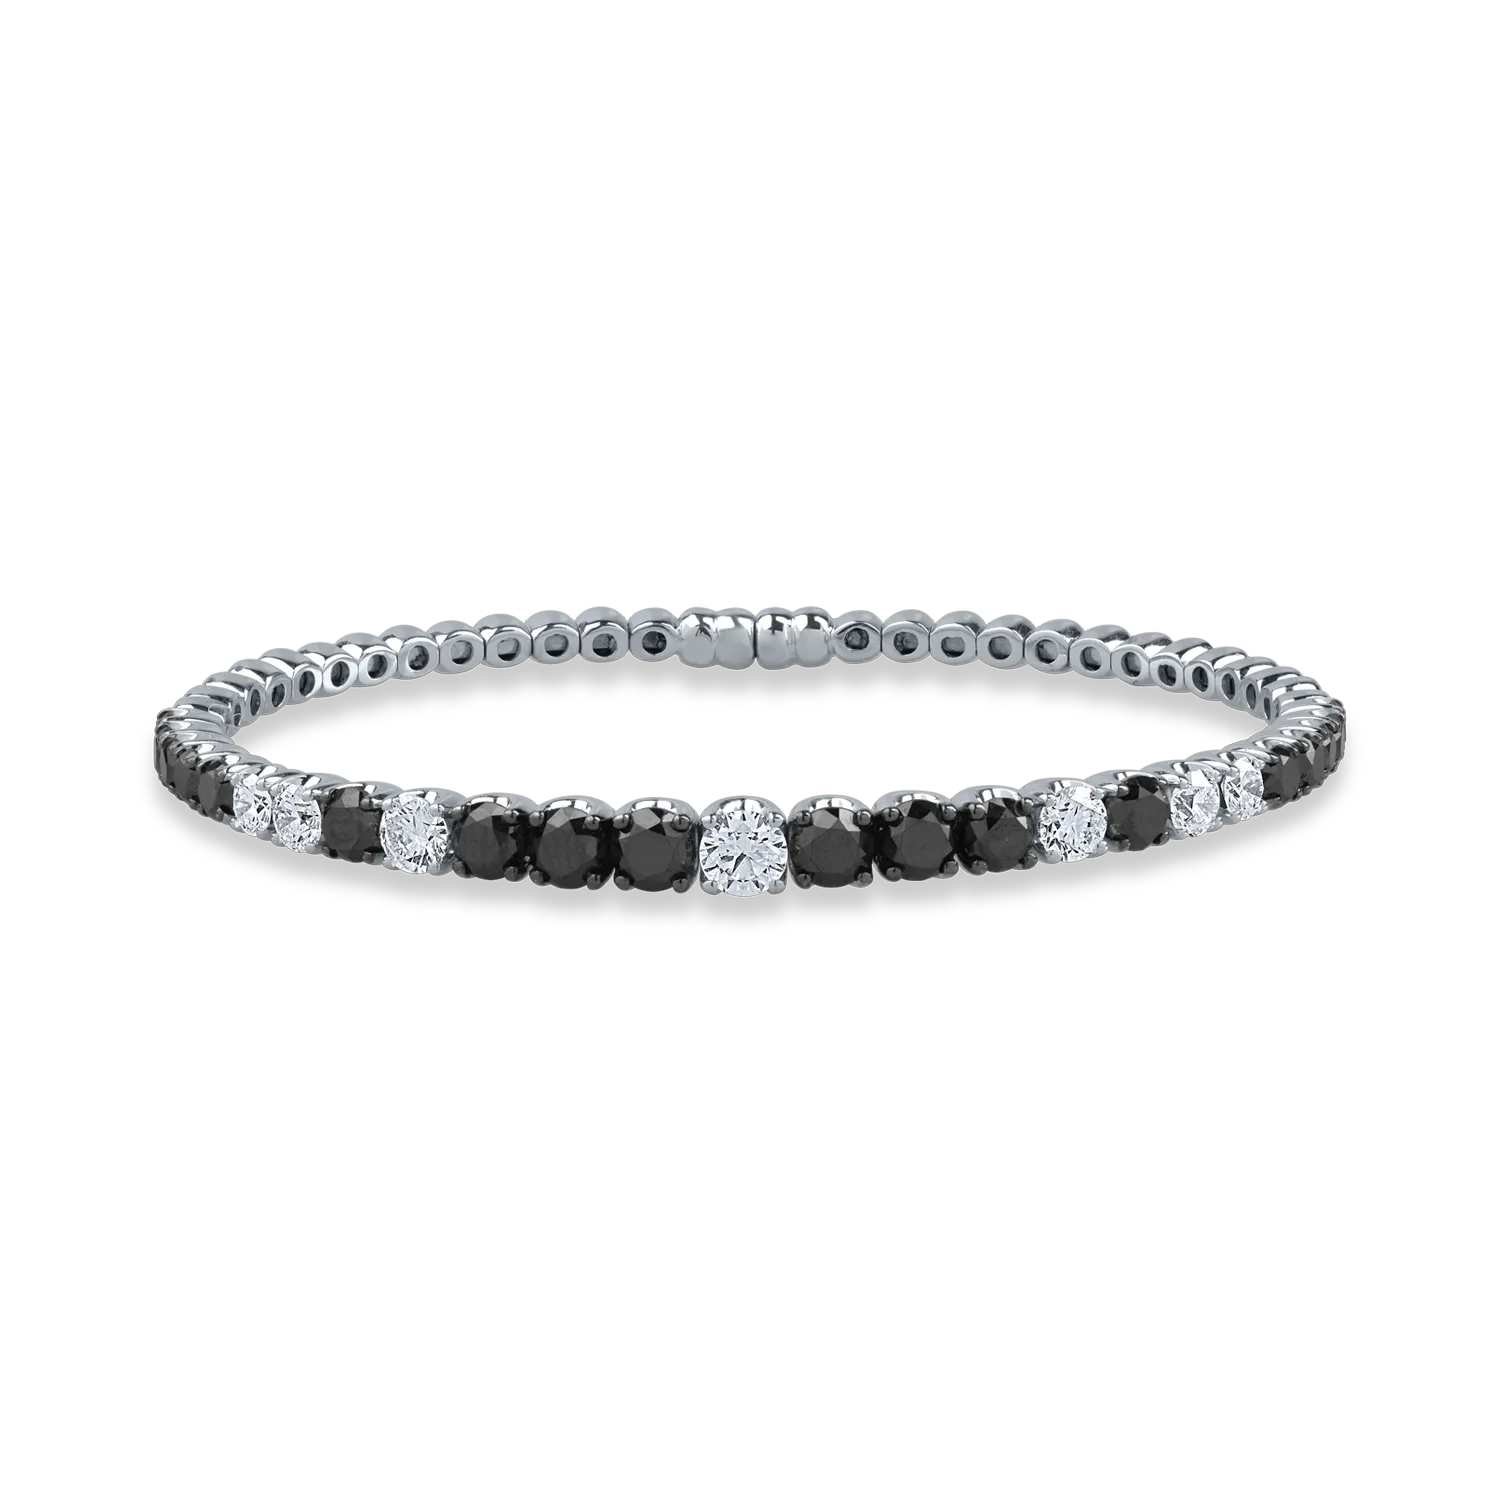 White gold bracelet with 4.48ct black diamonds and 1.43ct clear diamonds